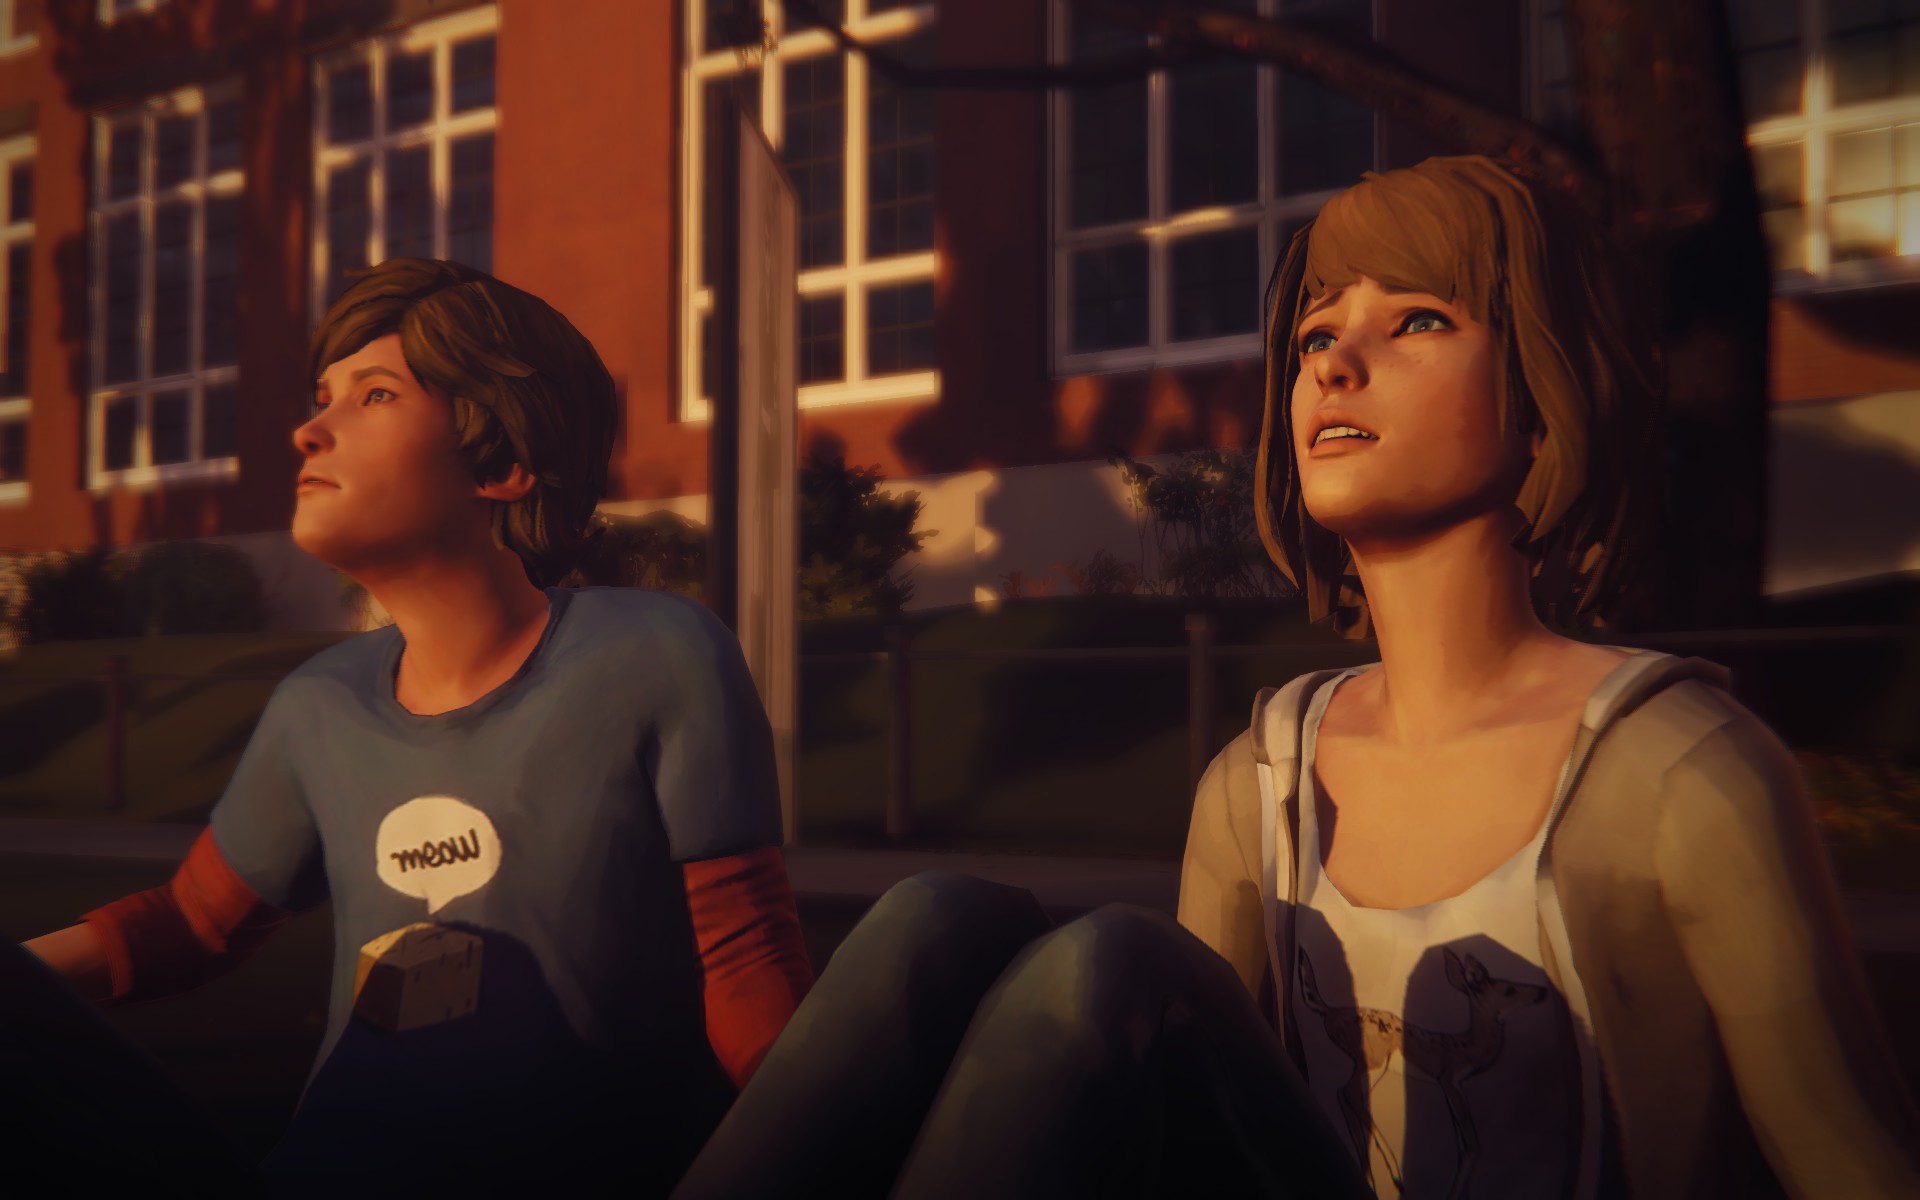 Review: Life is Strange: Before the Storm - Episódio 2